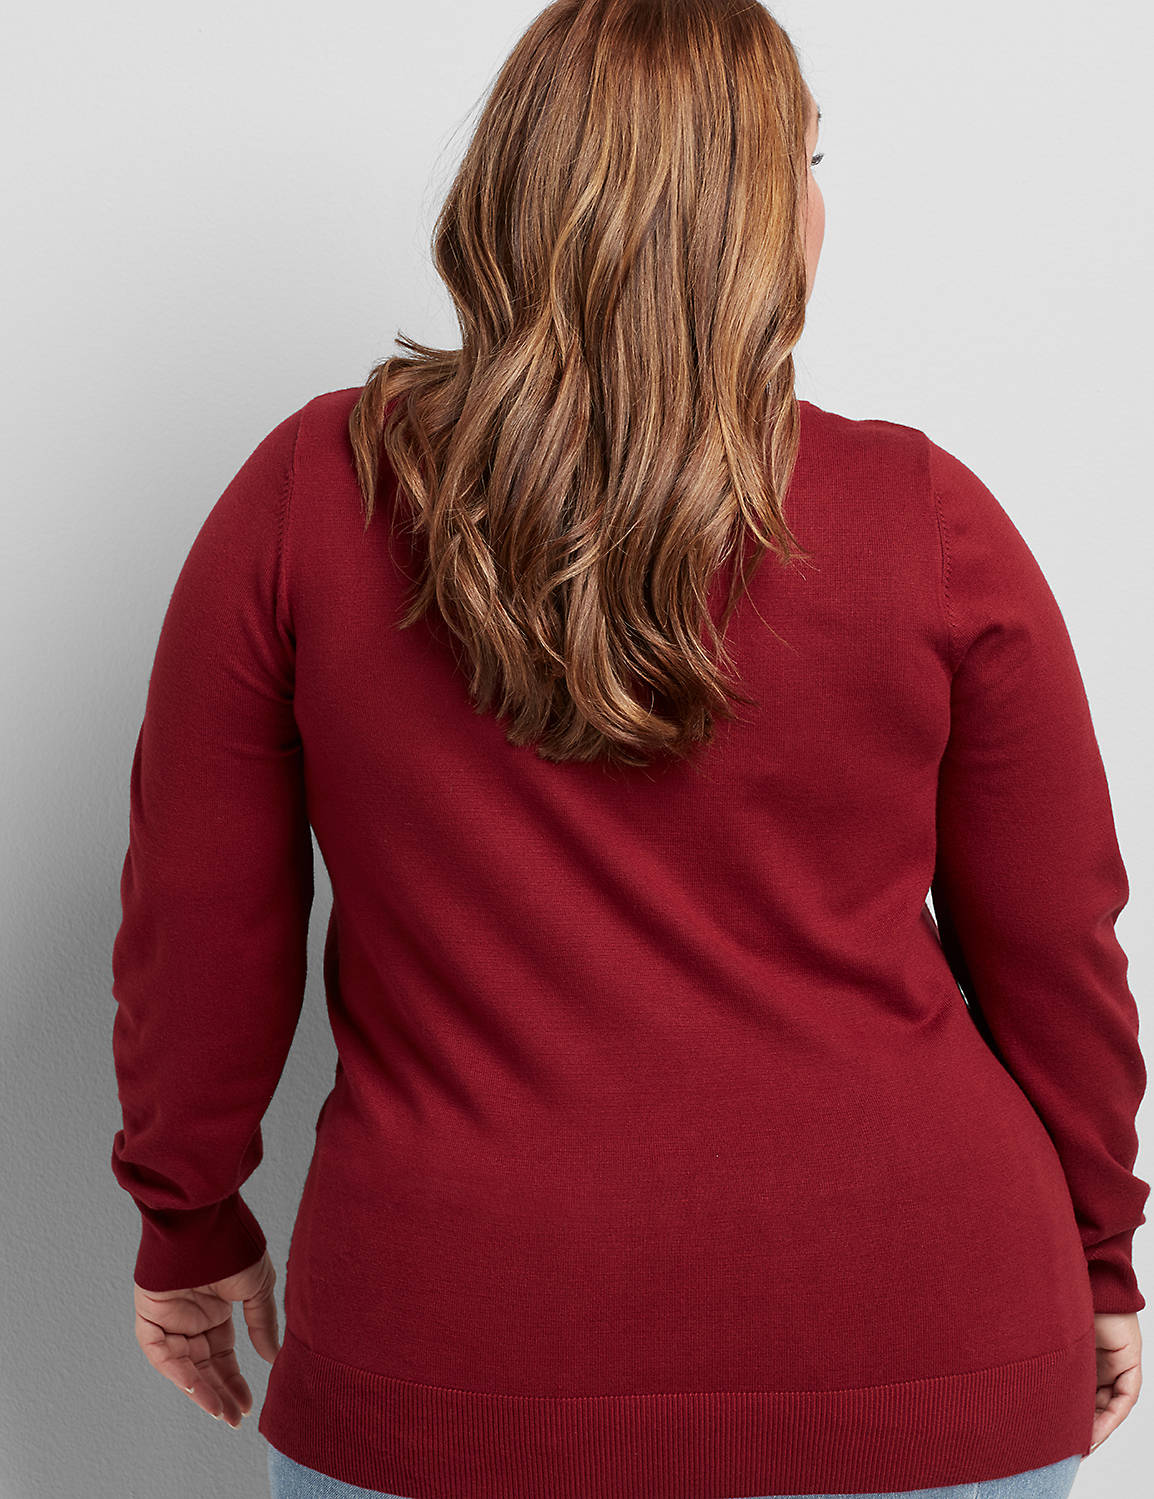 Long Sleeve Vneck Pullover with Shirred Side 1113192:PANTONE Pomegranate:10/12 Product Image 2